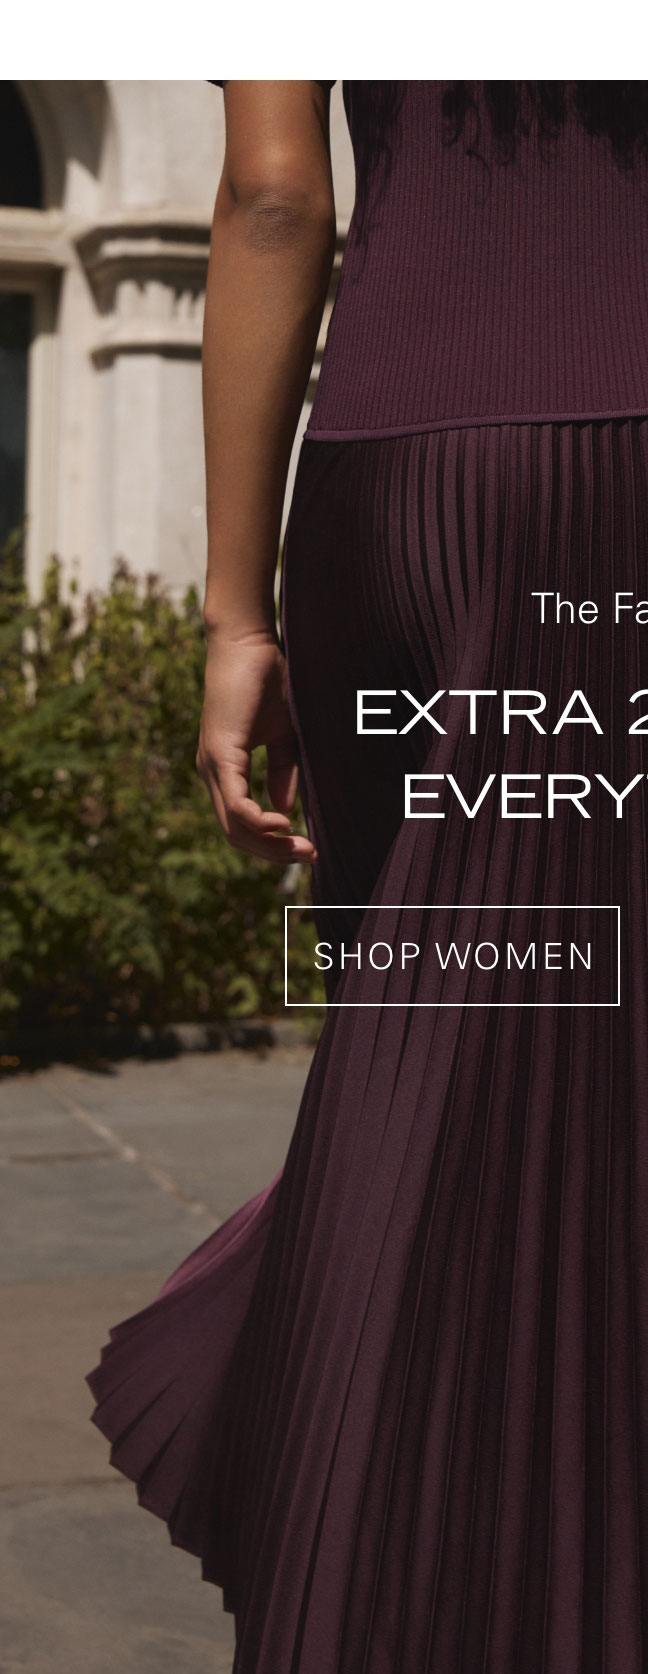 The Fall Sale EXTRA 20% OFF SHOP WOMEN